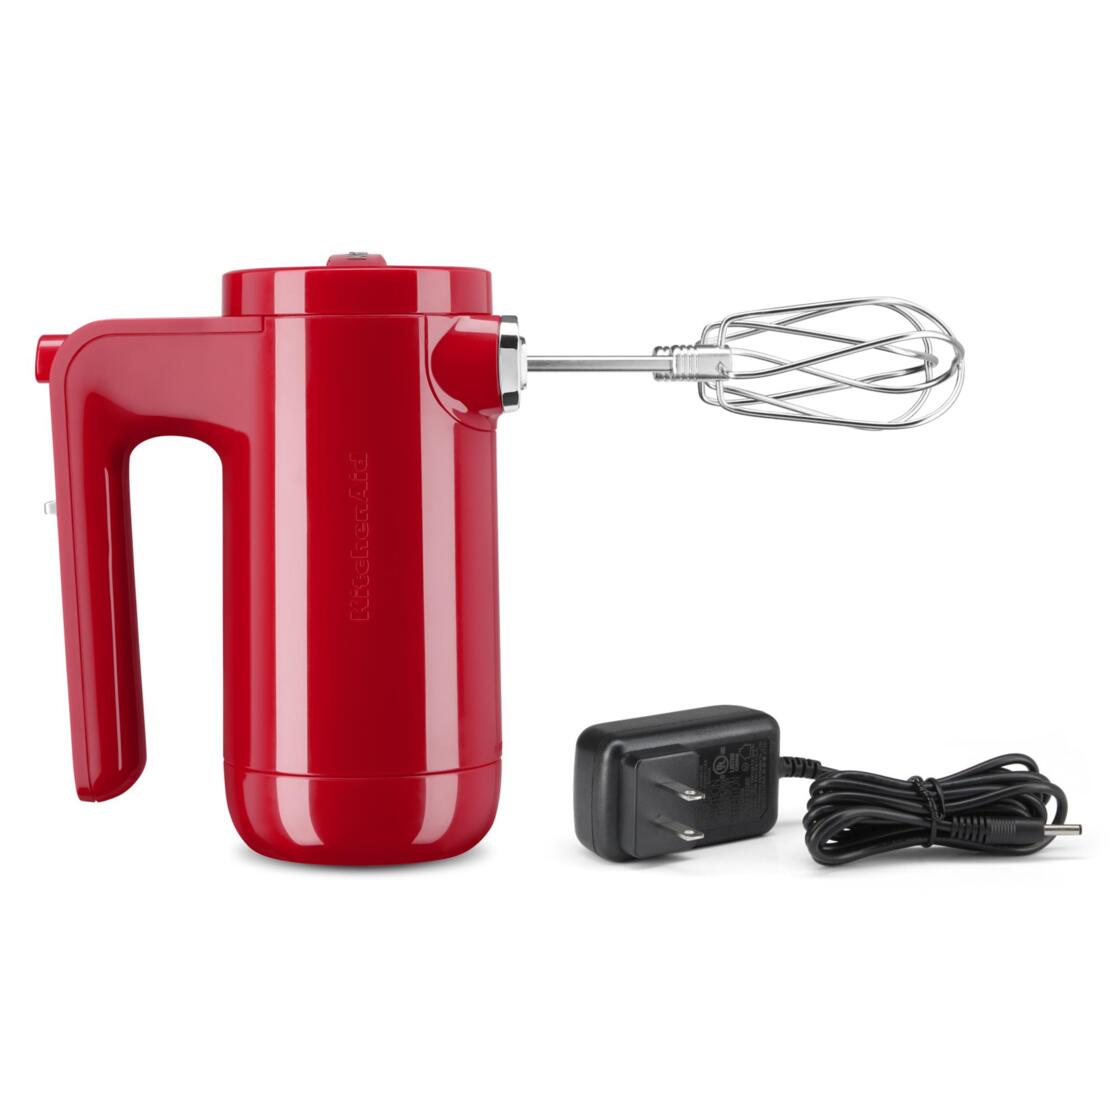 KitchenAid Cordless 7 Speed Hand Mixer, Passion Red, KHMB732 - image 3 of 6